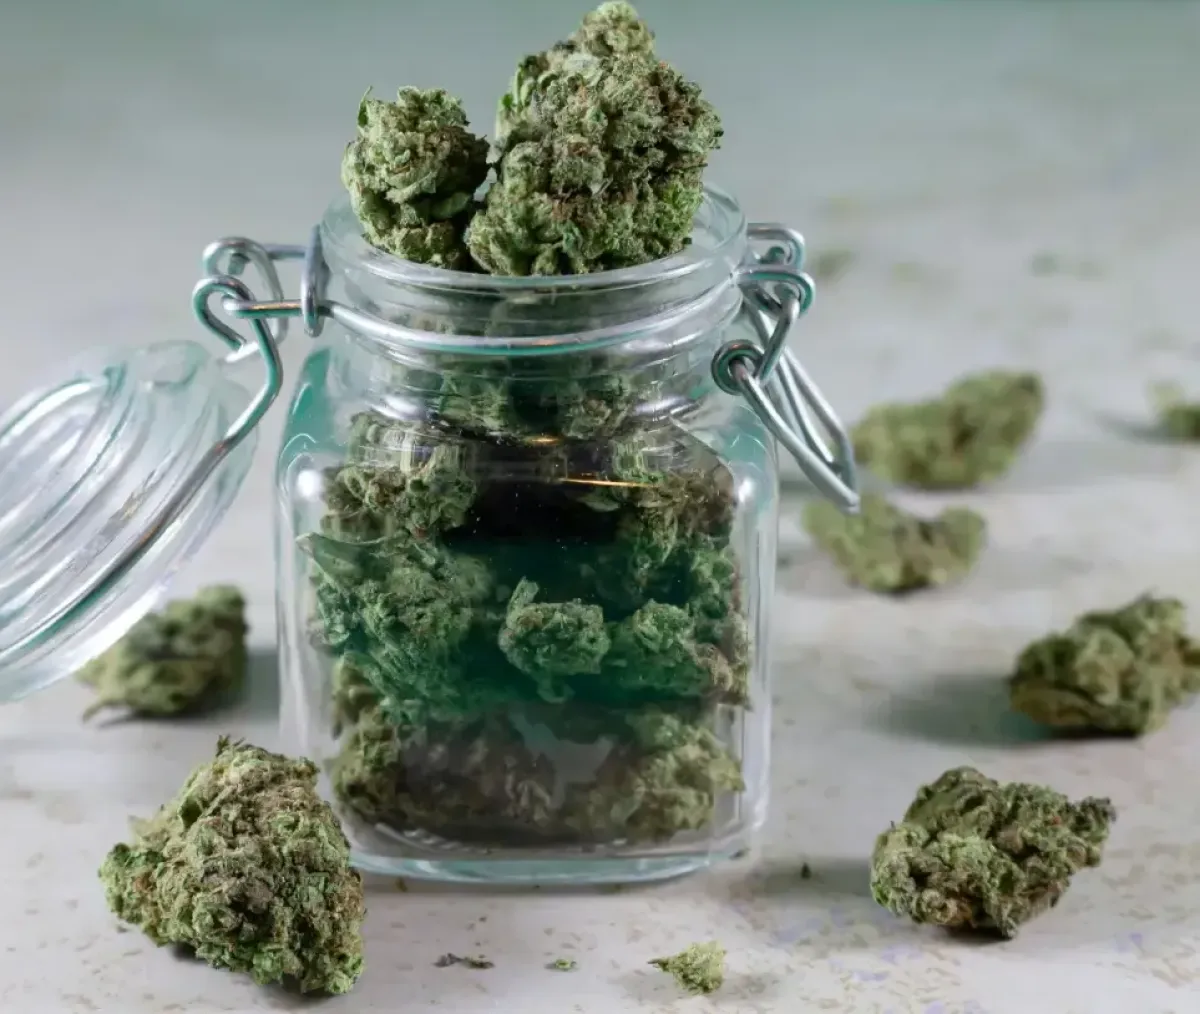 Dispensary weed in a jar